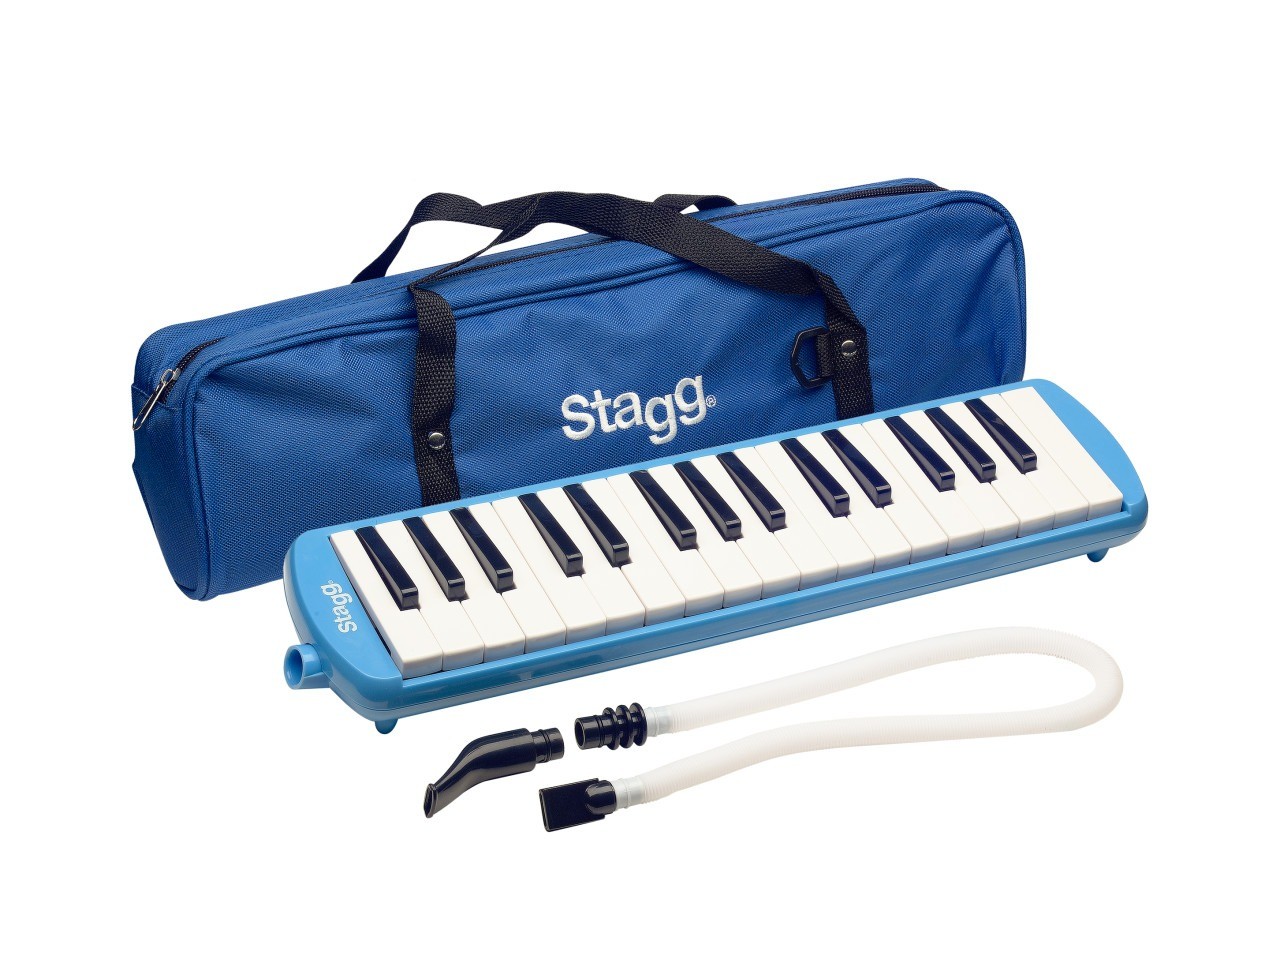 Stagg 32 Key Melodica with Bag, Blue